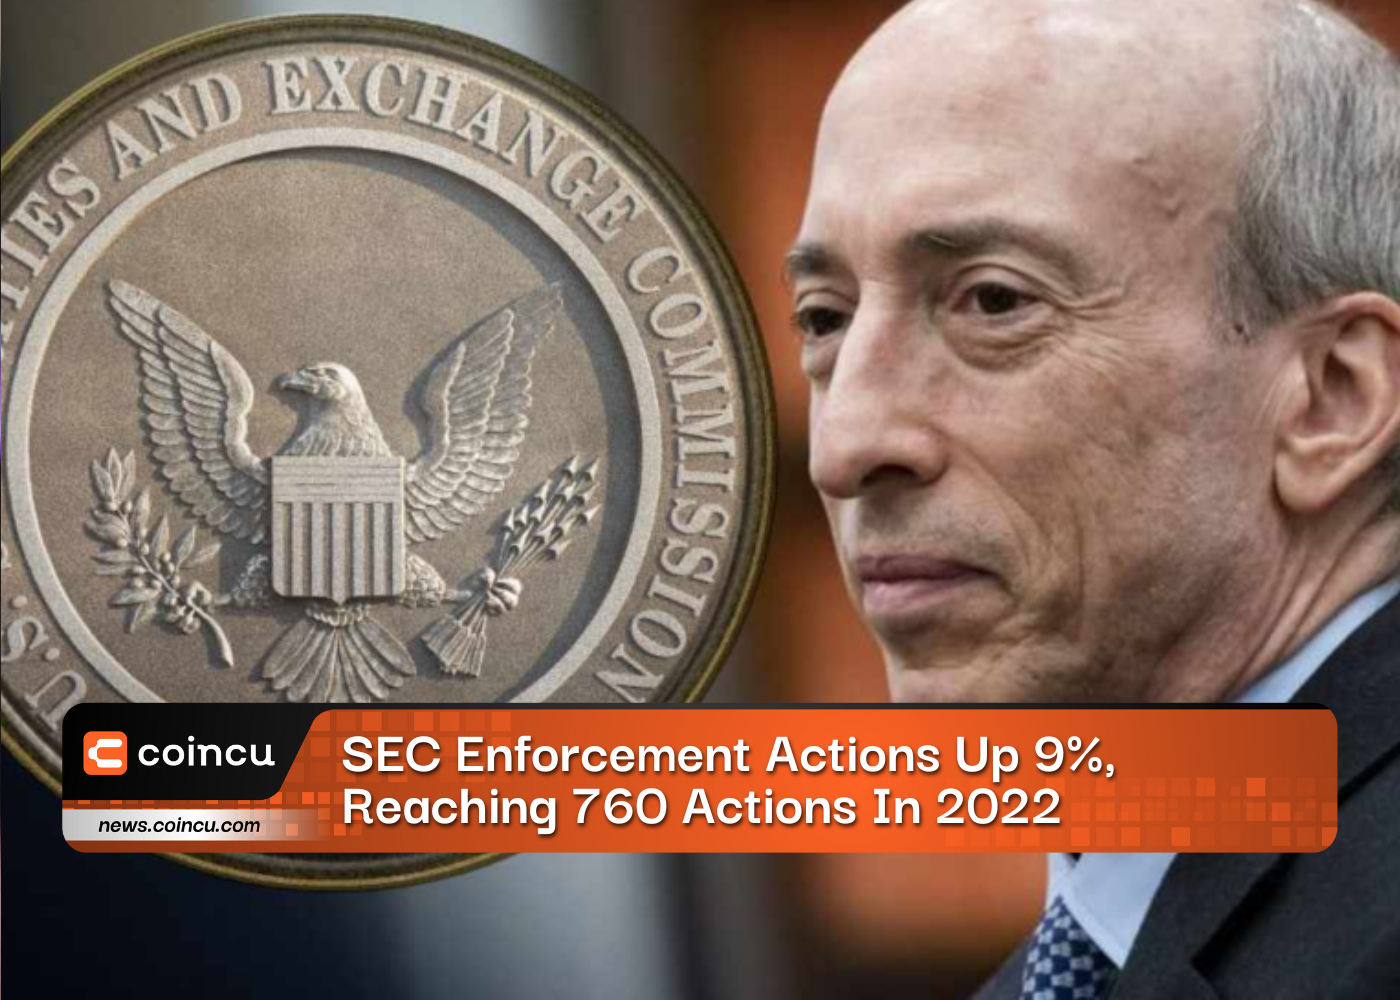 SEC Enforcement Actions Up 9%, Reaching 760 Actions In 2022